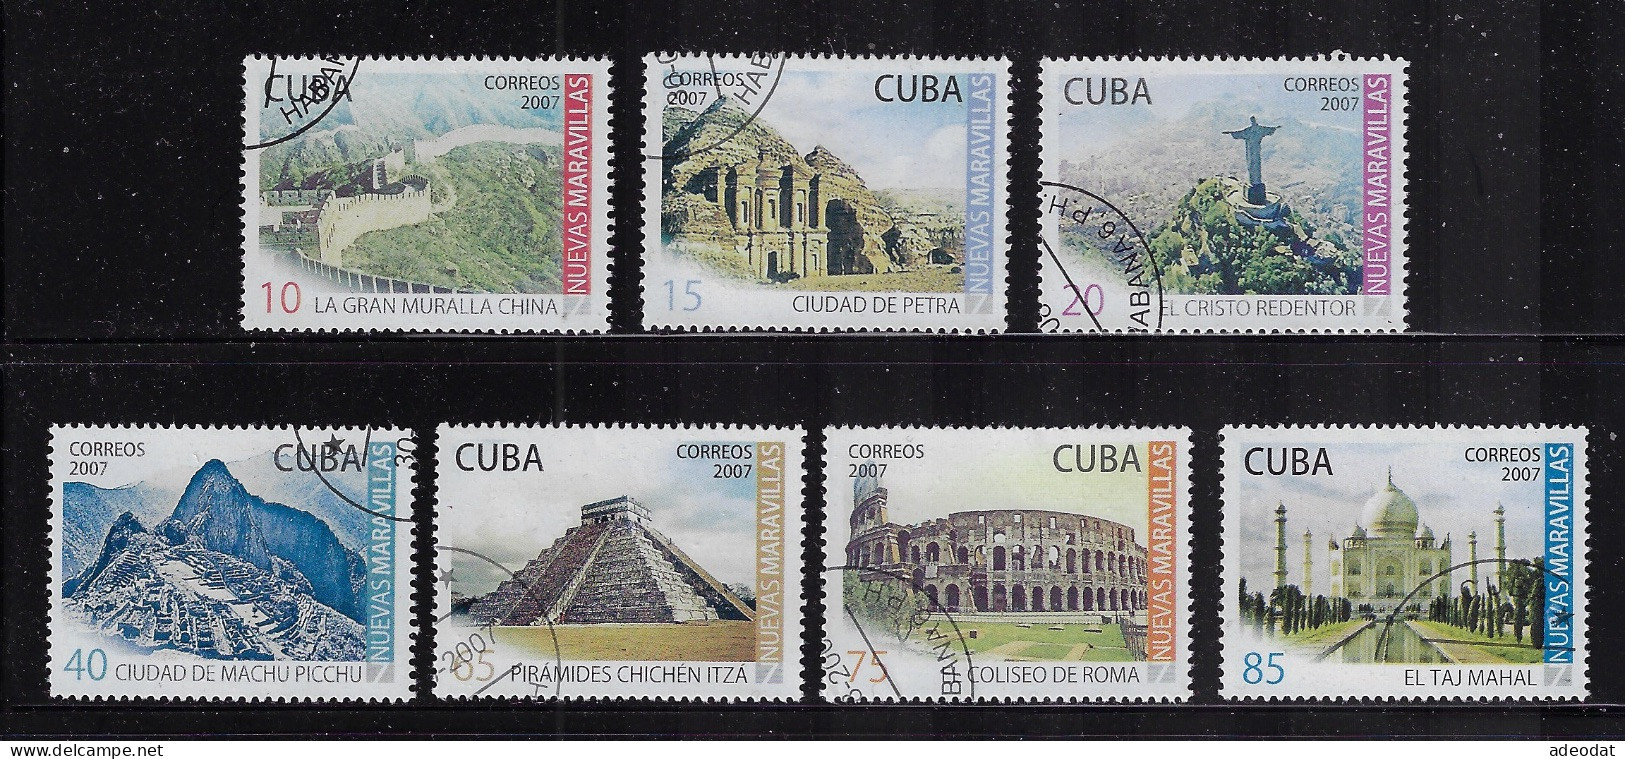 CUBA 2007 SCOTT 4731-4737 CANCELLED - Used Stamps